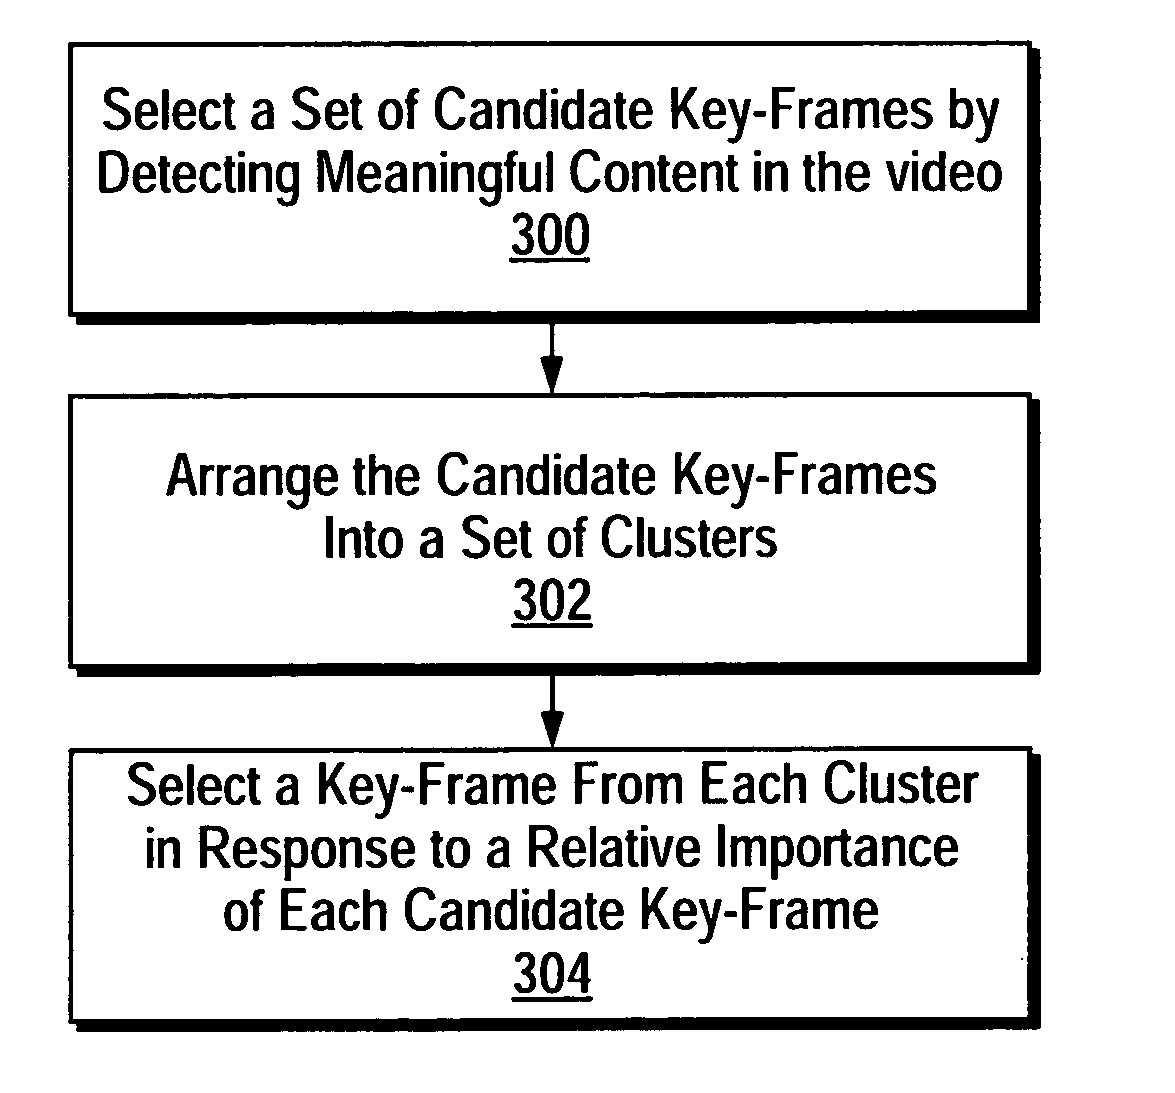 Intelligent key-frame extraction from a video